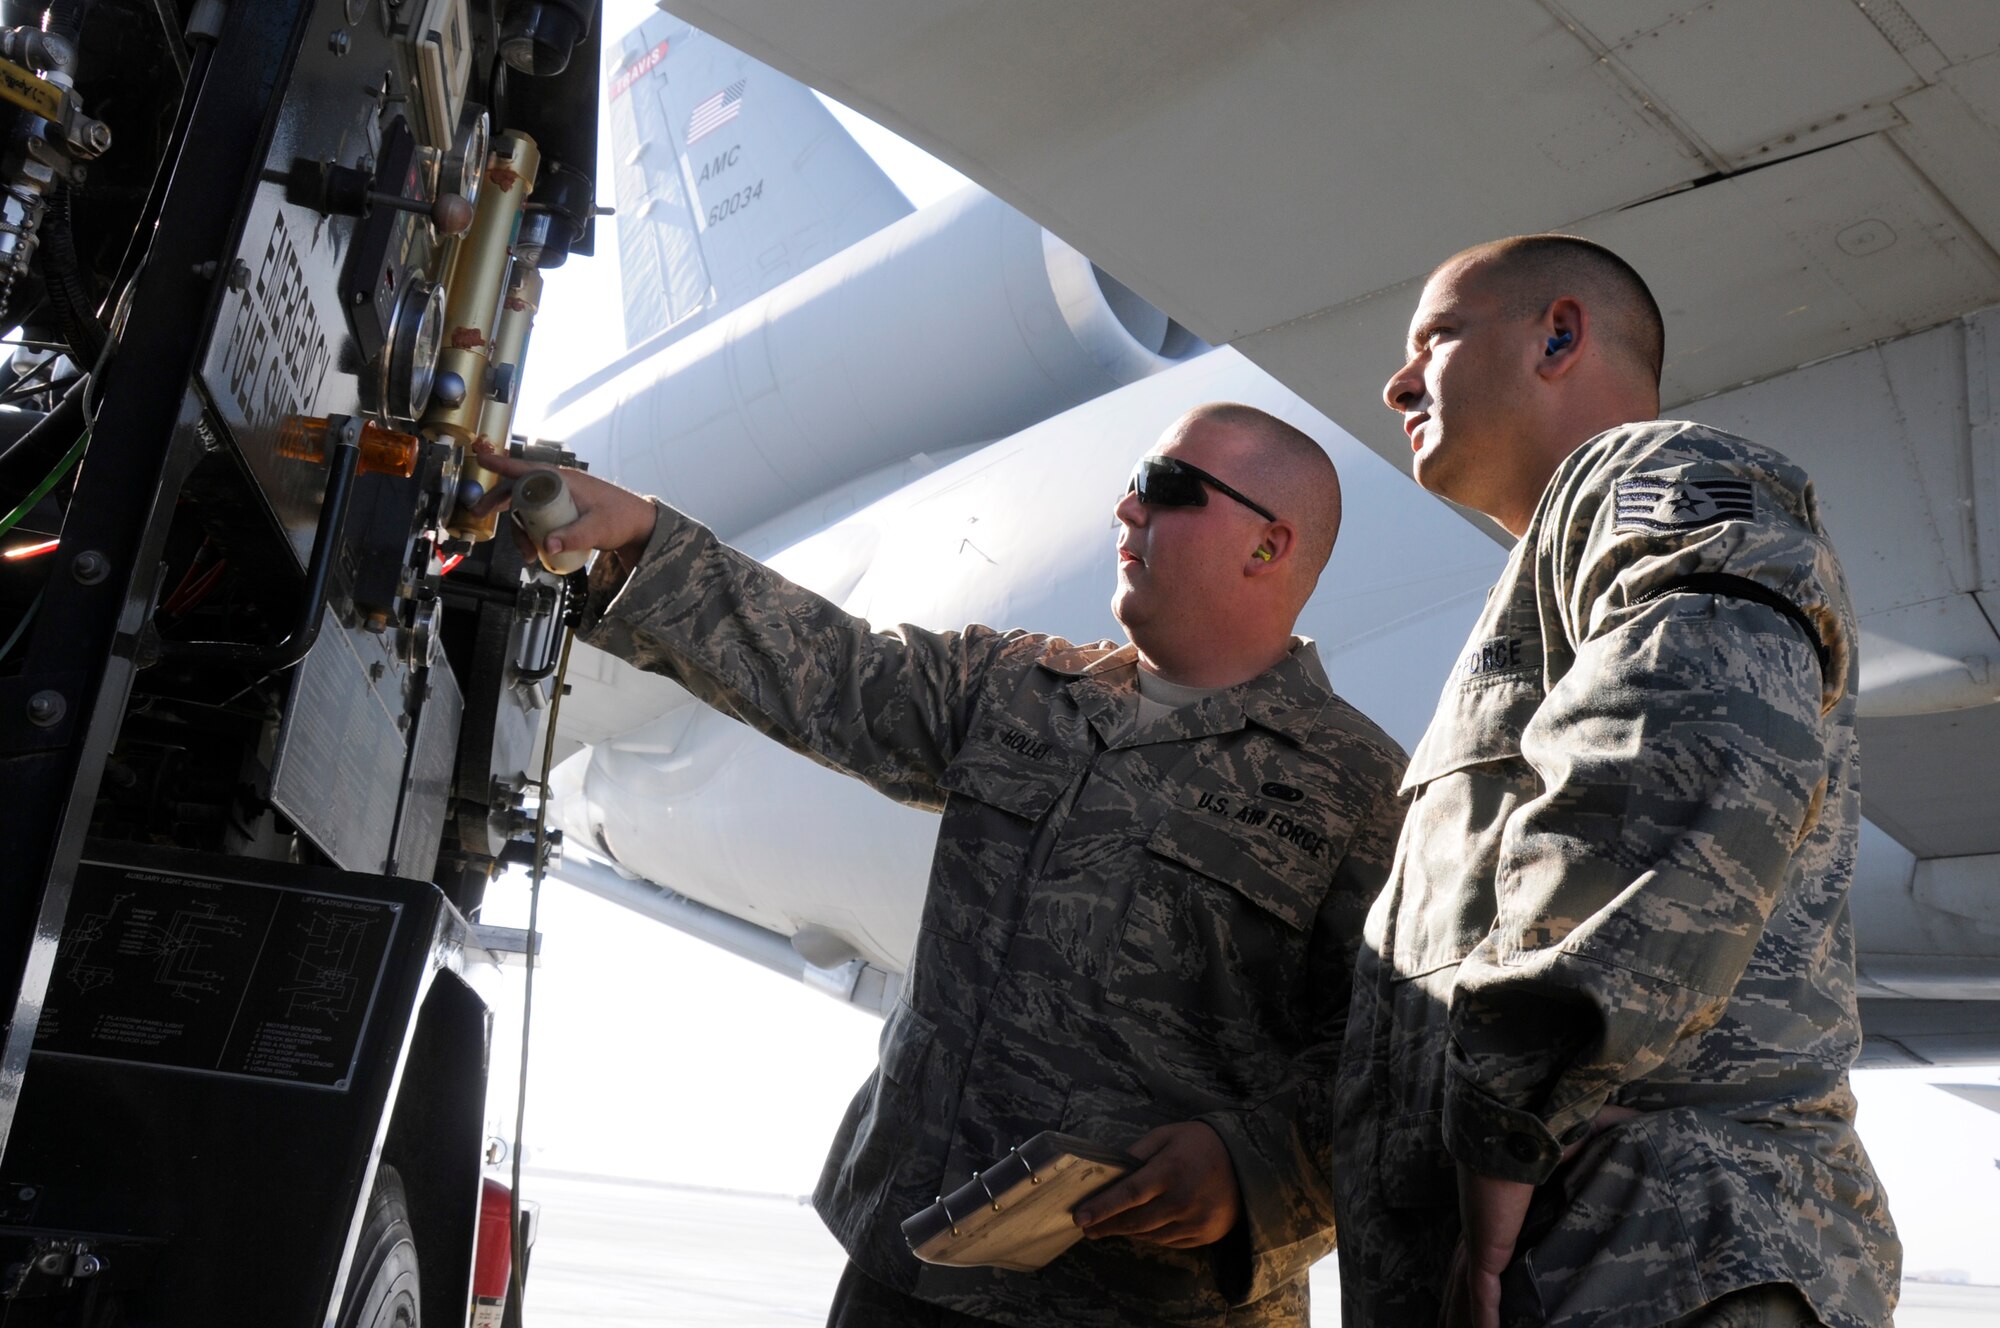 SOUTHWEST ASIA -- Airman 1st Class Brian Holley, 380th Expeditionary Logistics Readiness Squadron fuels operator goes through the procedures of refueling a KC-10 Extender with Staff Sgt. Joshua Schubert, 380th ELRS distribution supervisor, Jan 21. Sergeant Schubert performs checks at random to ensure proper procedures are followed and assists other Airmen when needed during aircraft refueling. Sergeant Schubert is deployed from Eglin AFB, Fla. and is from Hatboro, Pa. Airman Holley is deployed from the 178th Fighter Wing, Ohio Air National Guard and is from Dayton, OH. (U.S. Air Force photo by Senior Airman Brian J. Ellis) (Released)